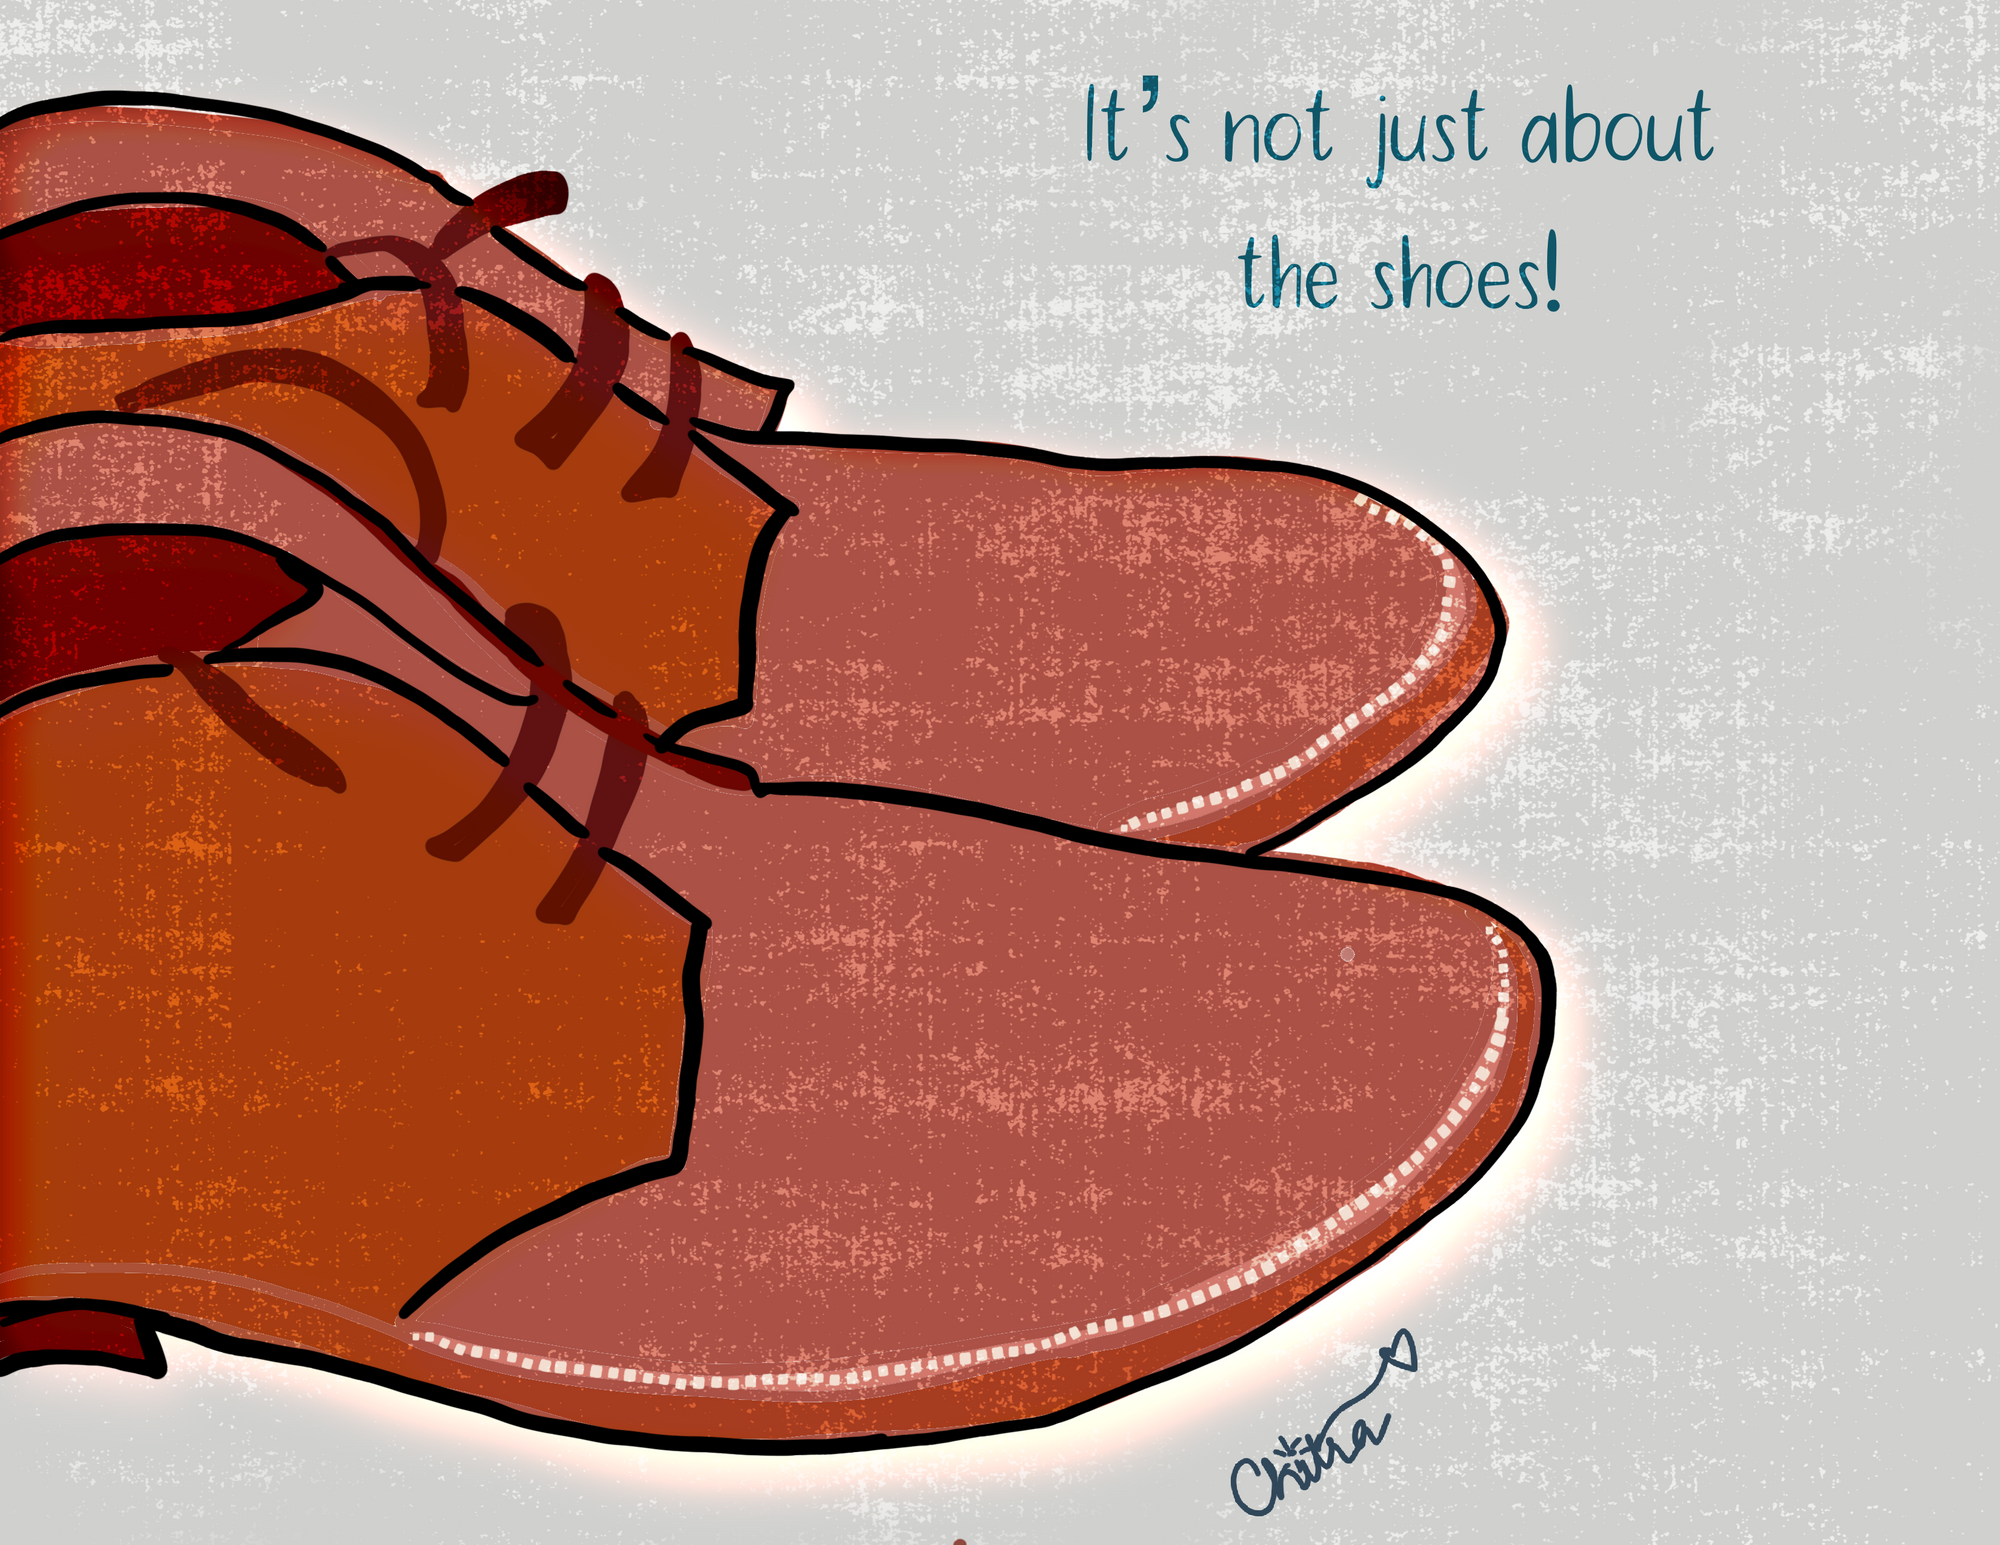 It's not just about the shoes. (Image is an illustration of a pair of formal shoes)